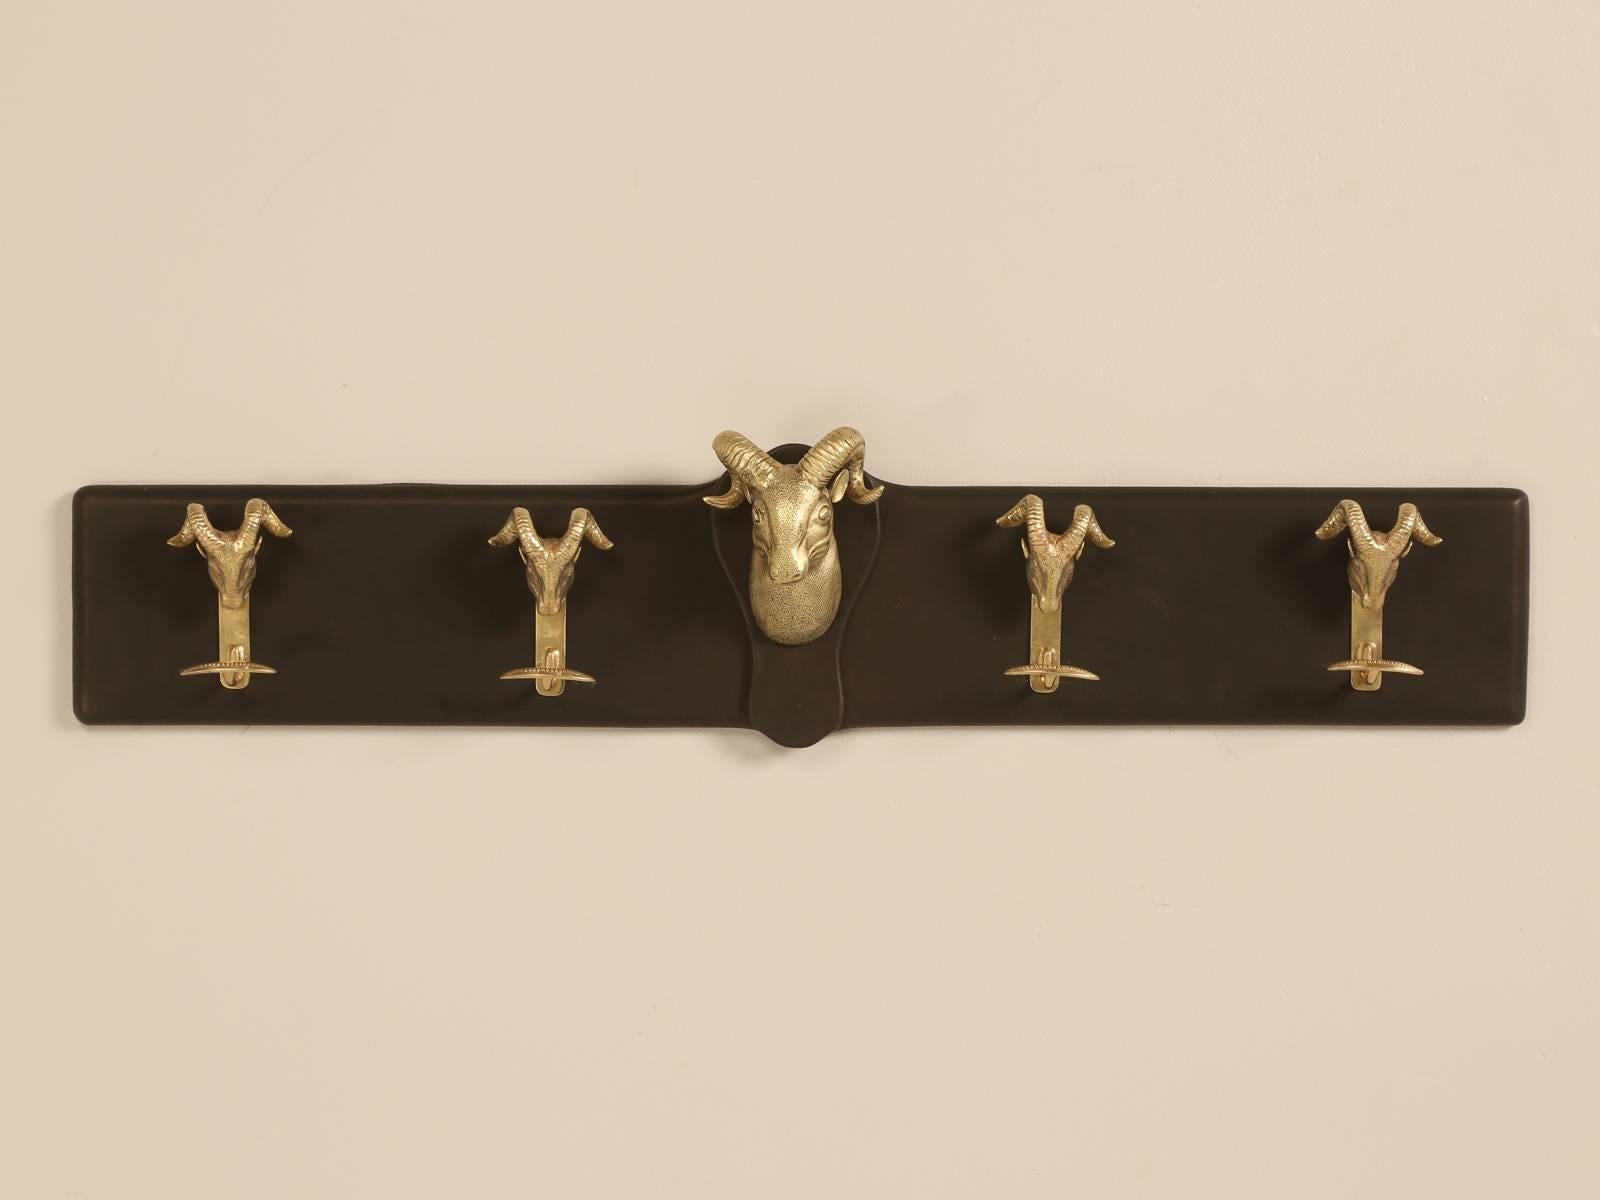 Vintage French solid brass Ram’s head coat rack, mounted on a black leather covered wood frame.